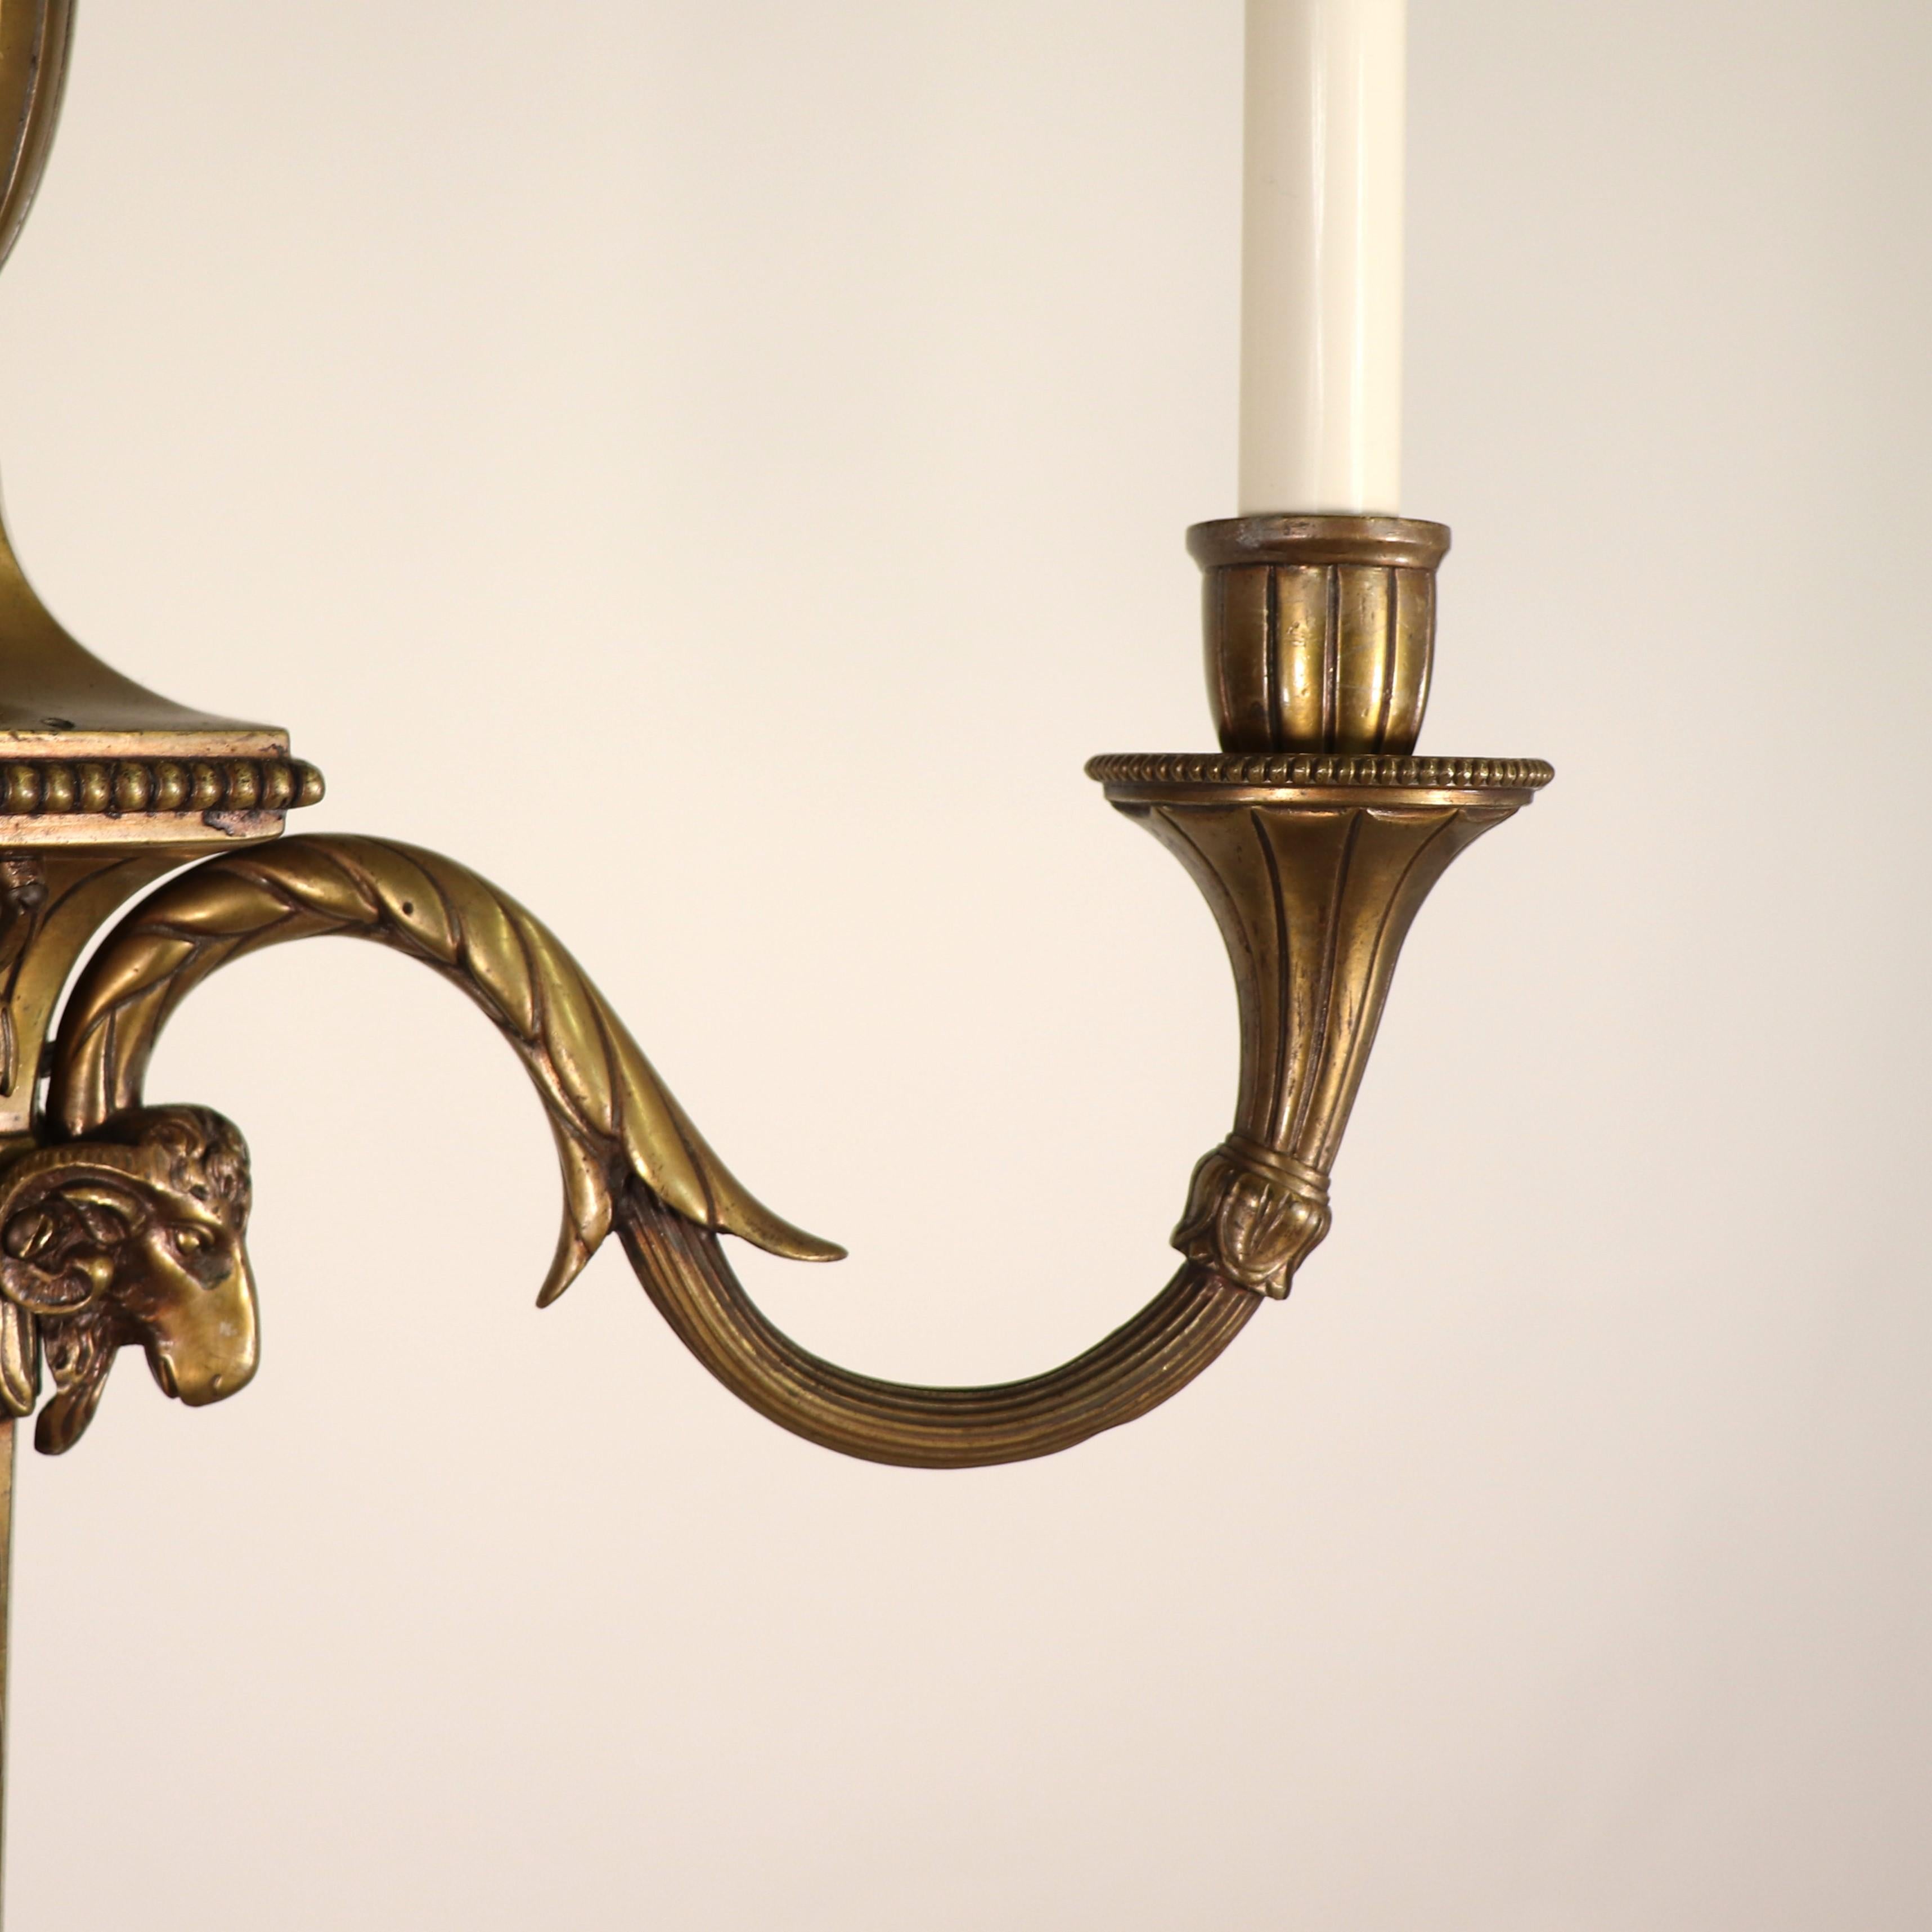 19th Century French Louis XVI Style Neoclassical Bronze Flambeau Chandelier For Sale 7